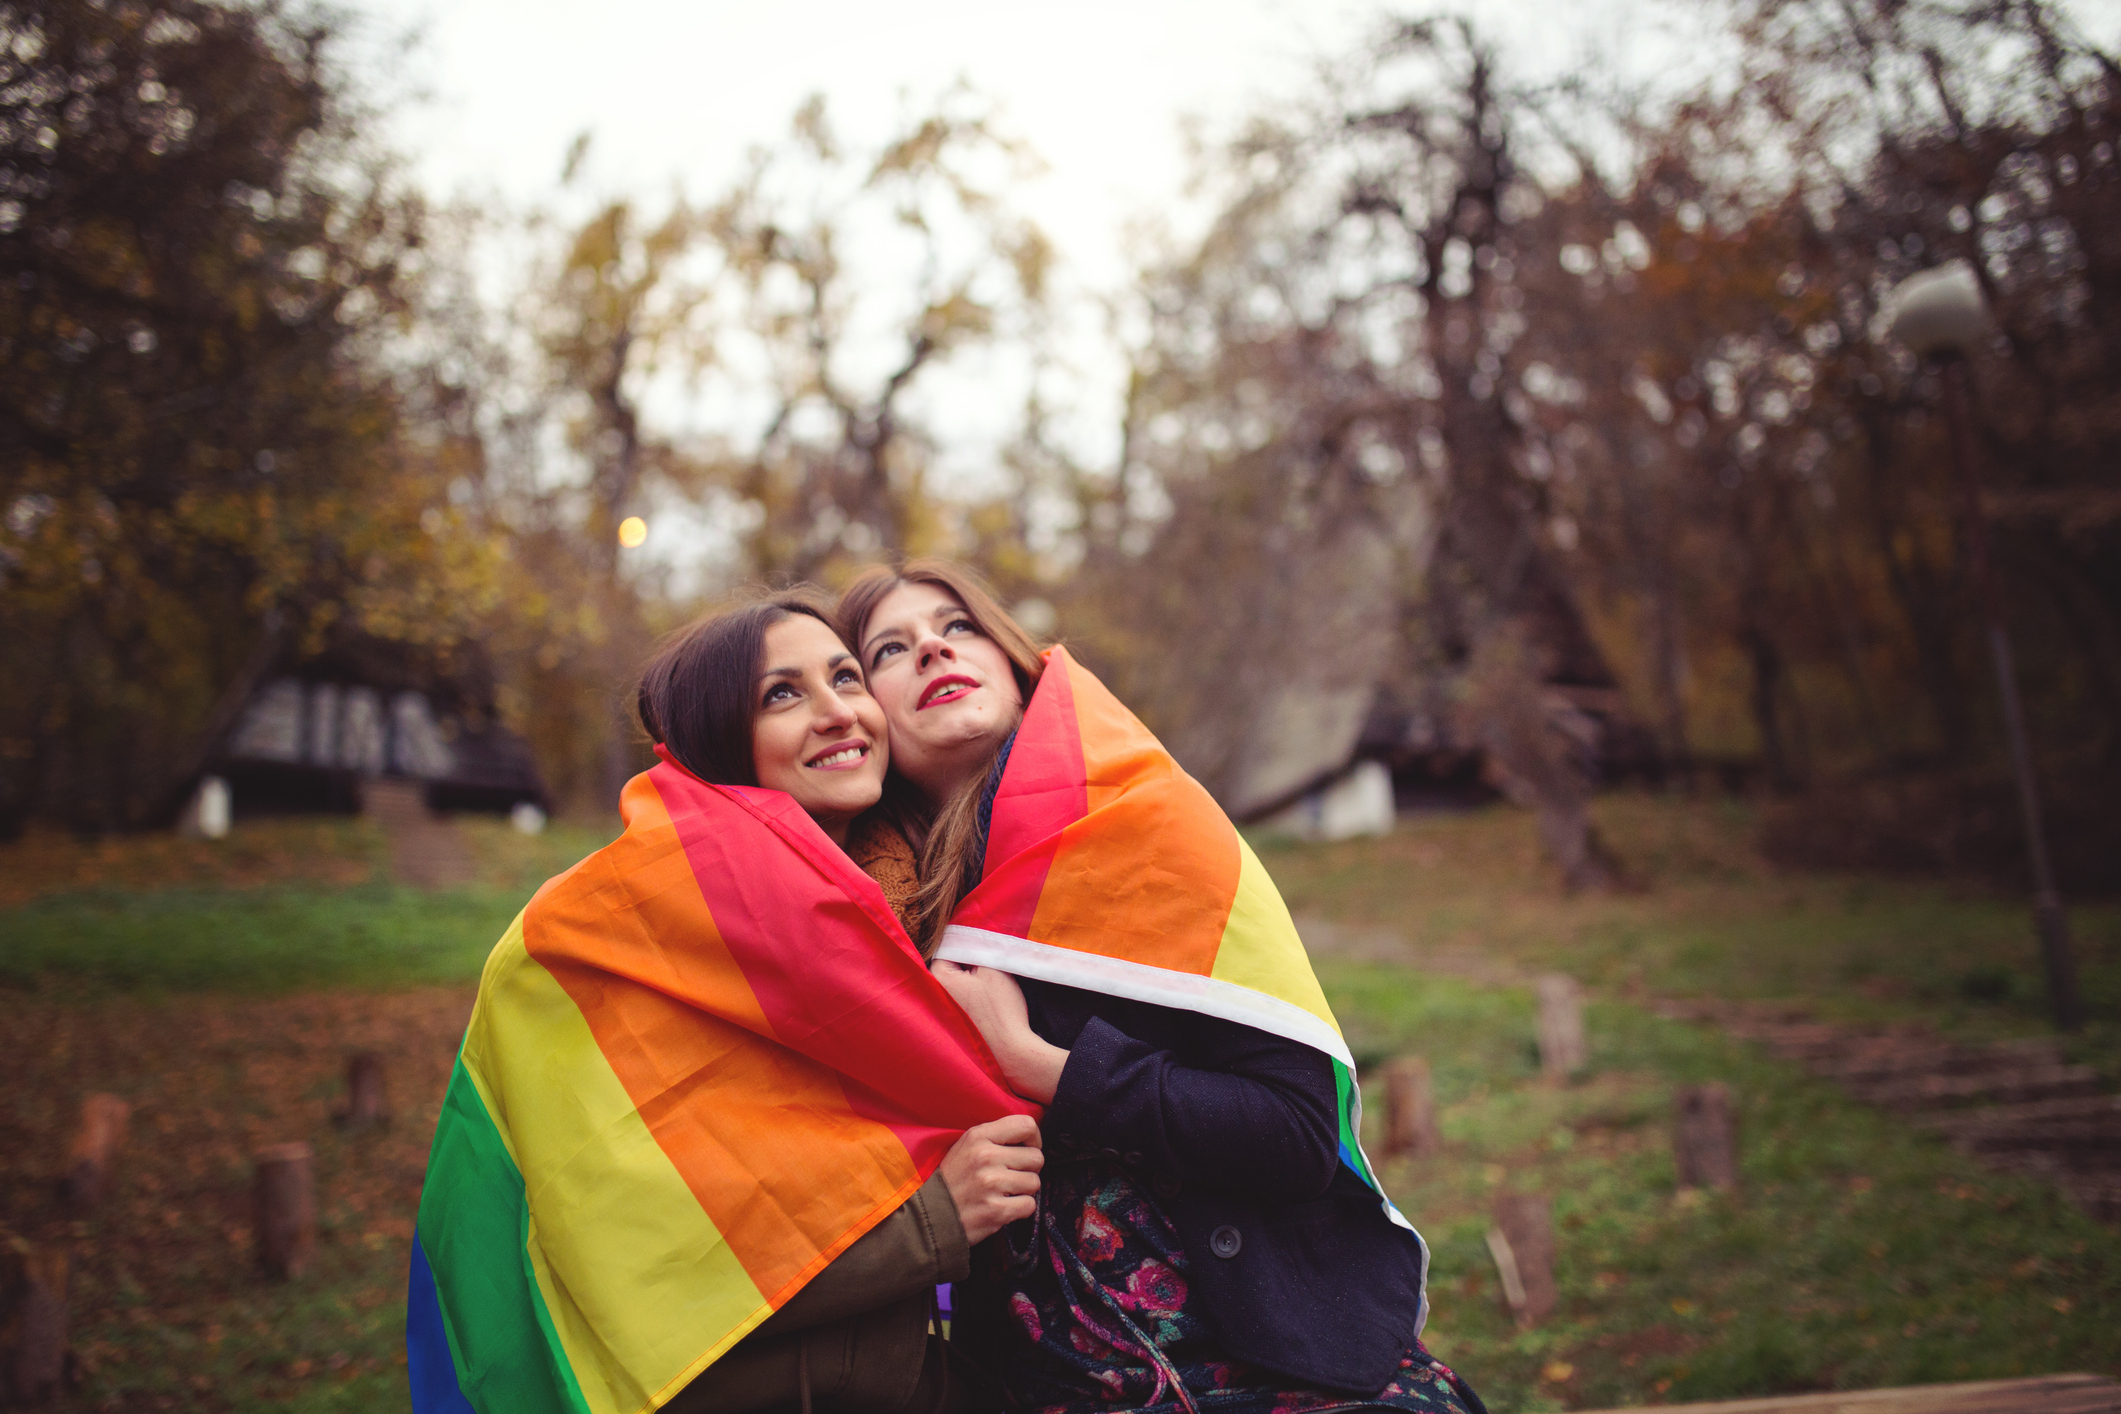 Gay relationships can be happier than hetero, study finds - UQ News